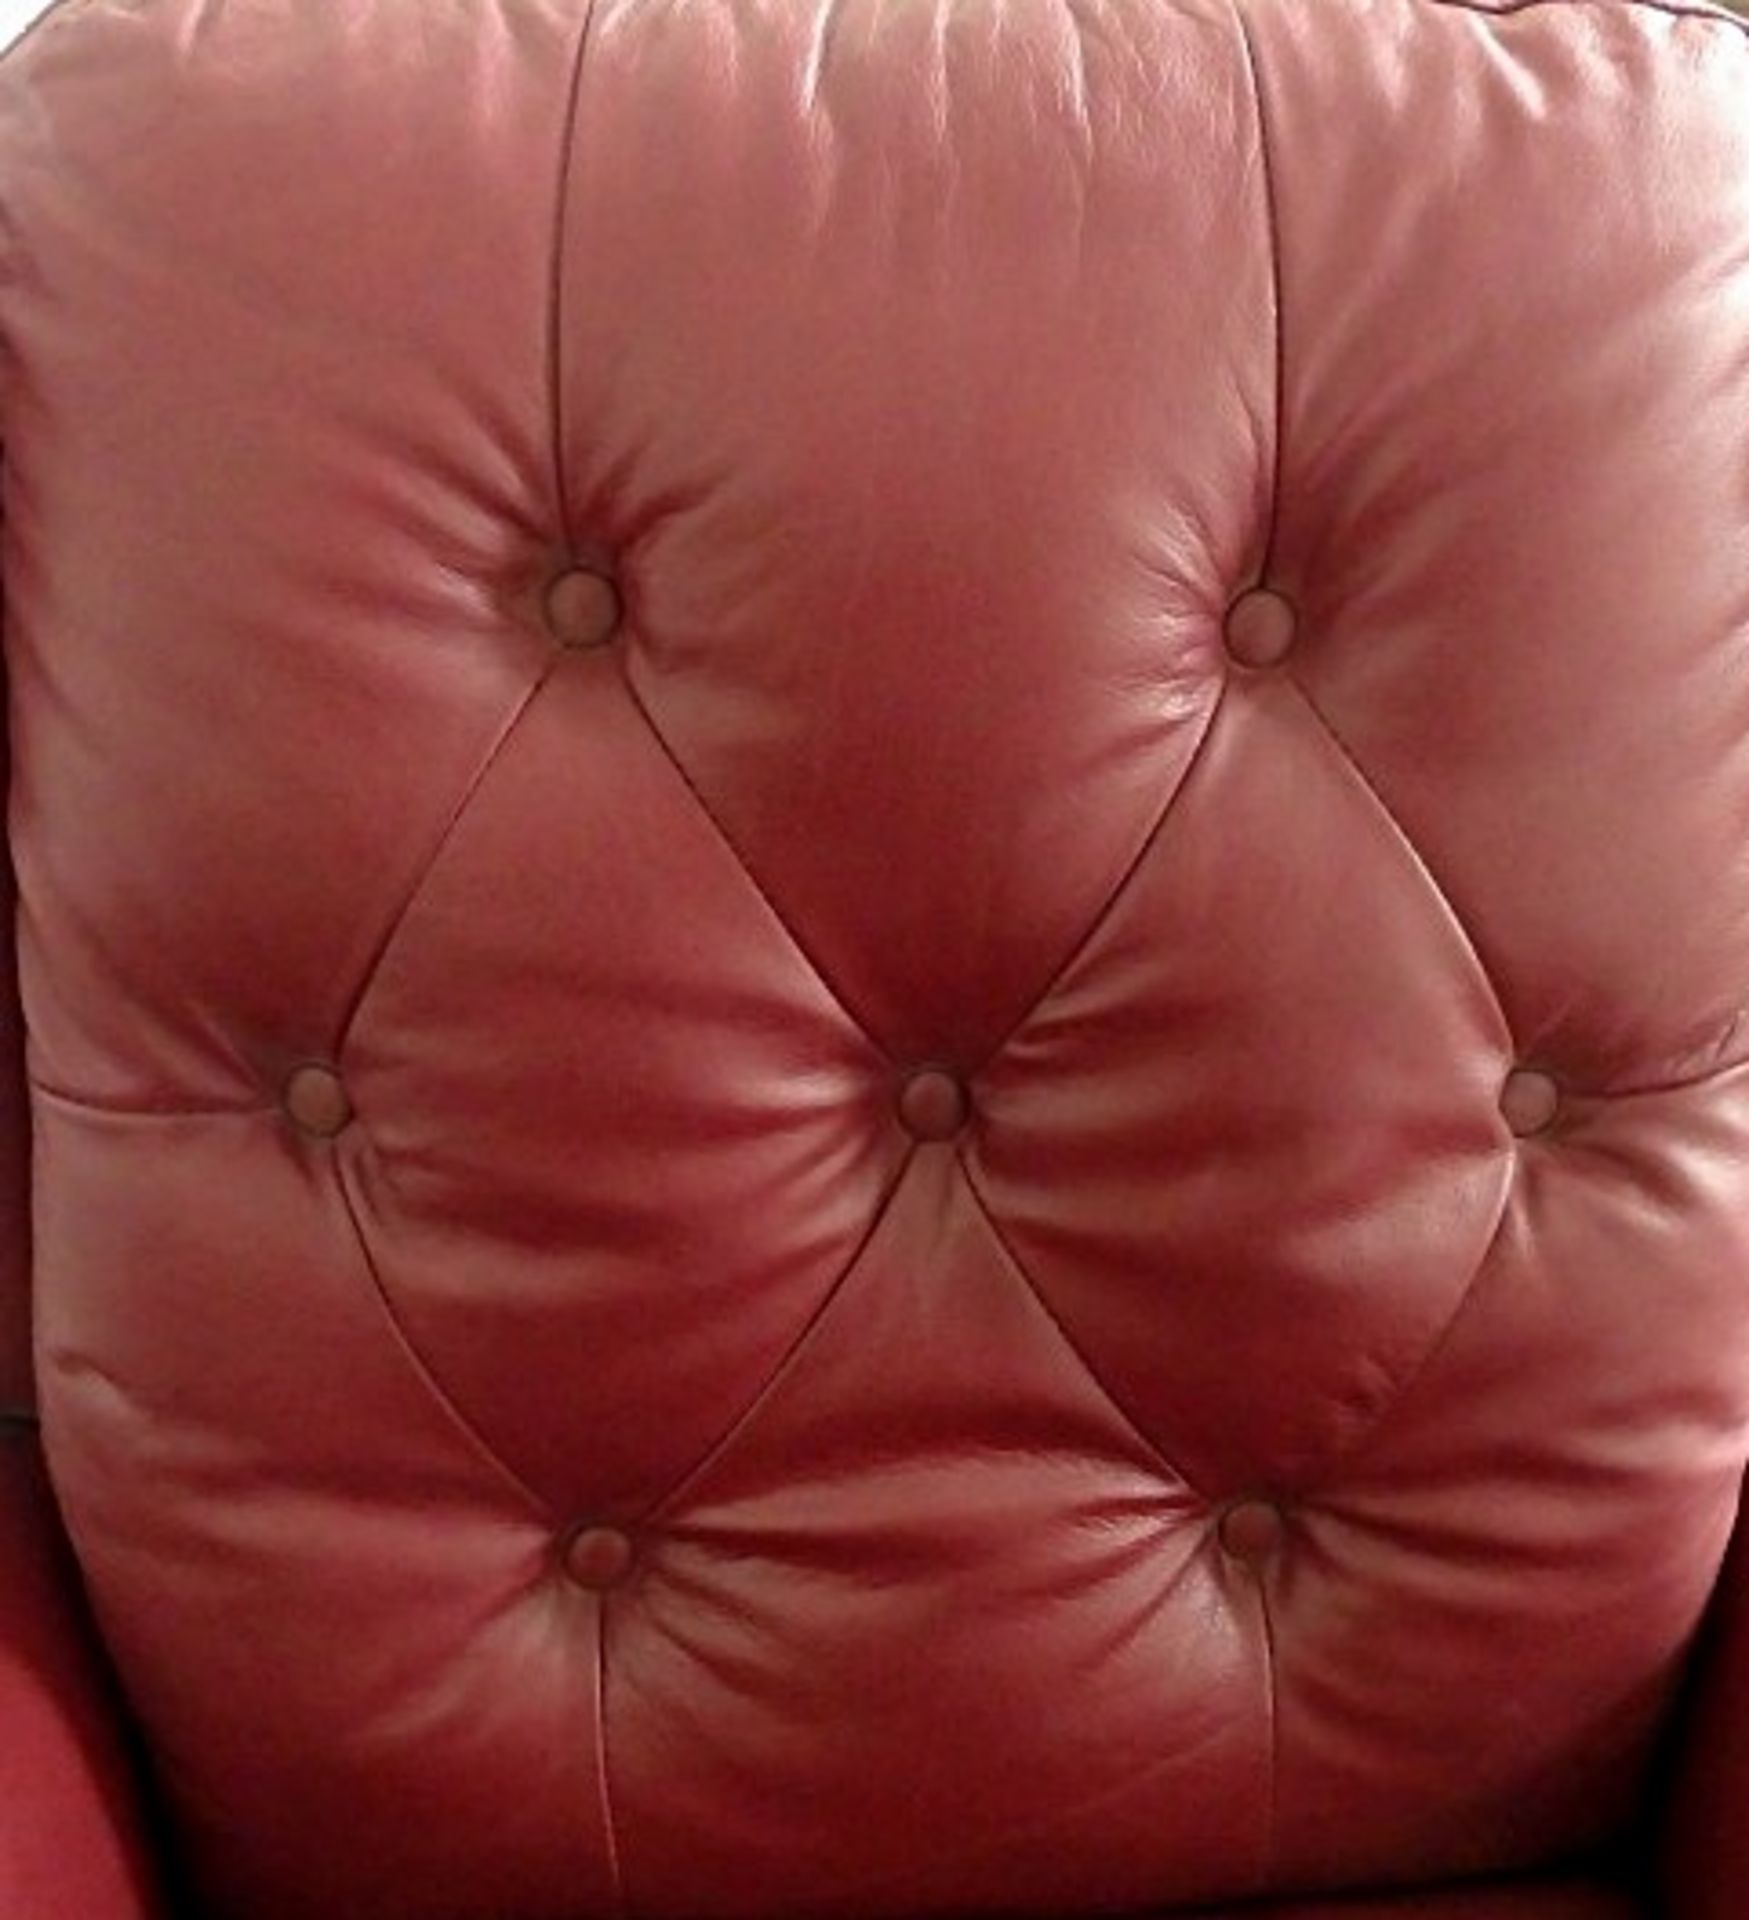 1 x "Beatrice" Riser Recliner Chair By TCS - Upholstered In Genuine Italian Leather (Red) - Pocket - Image 6 of 9